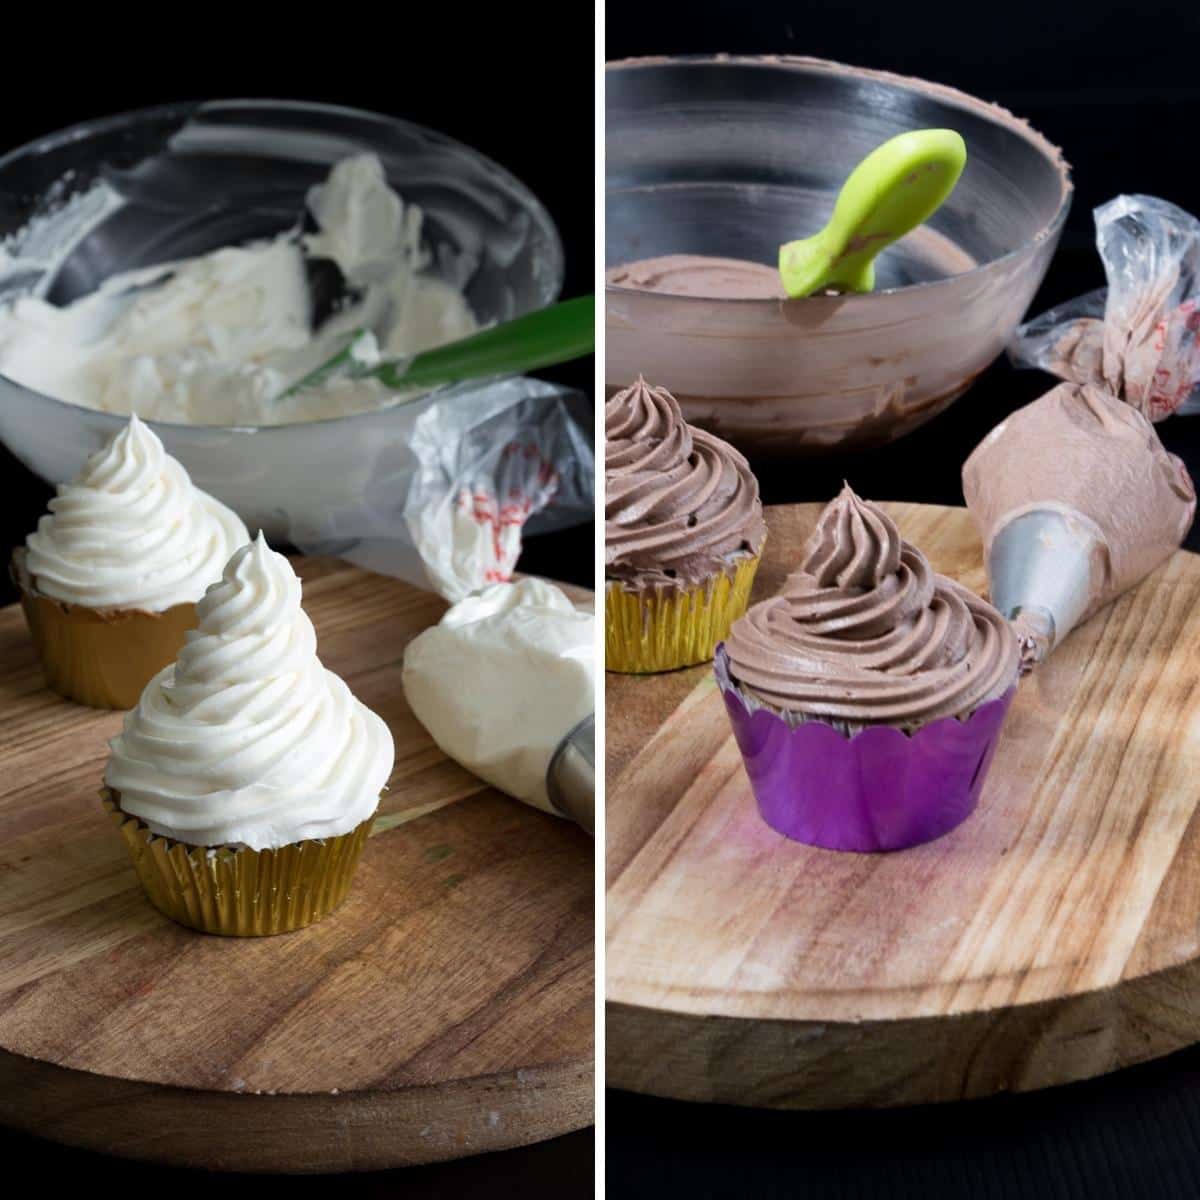 Bakery style frosted cupcakes collage.